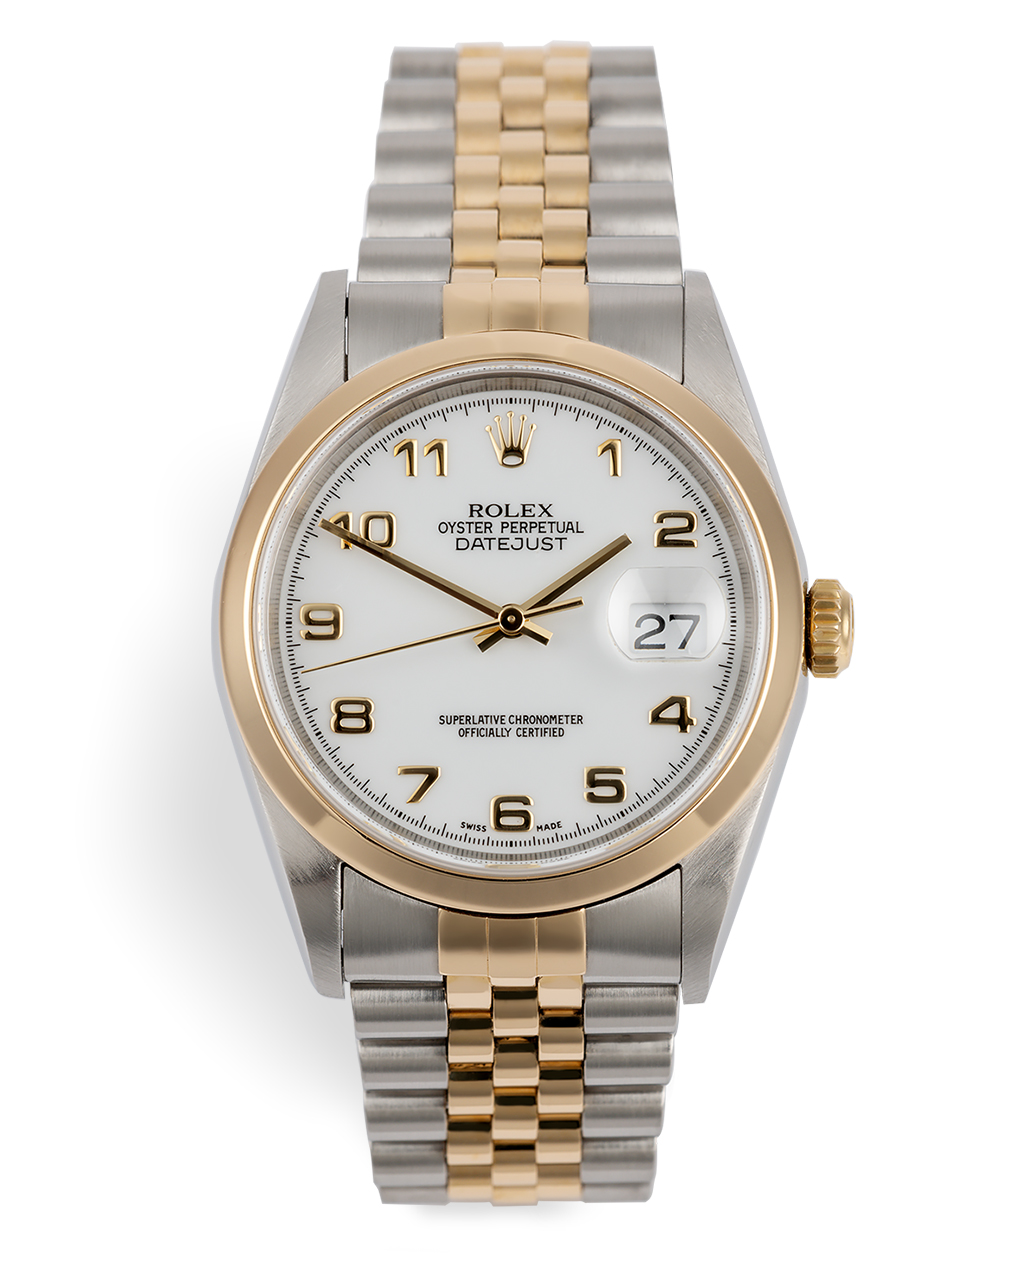 Rolex Datejust Watches | ref 16203 | 18ct Yellow Gold & Steel | The ...